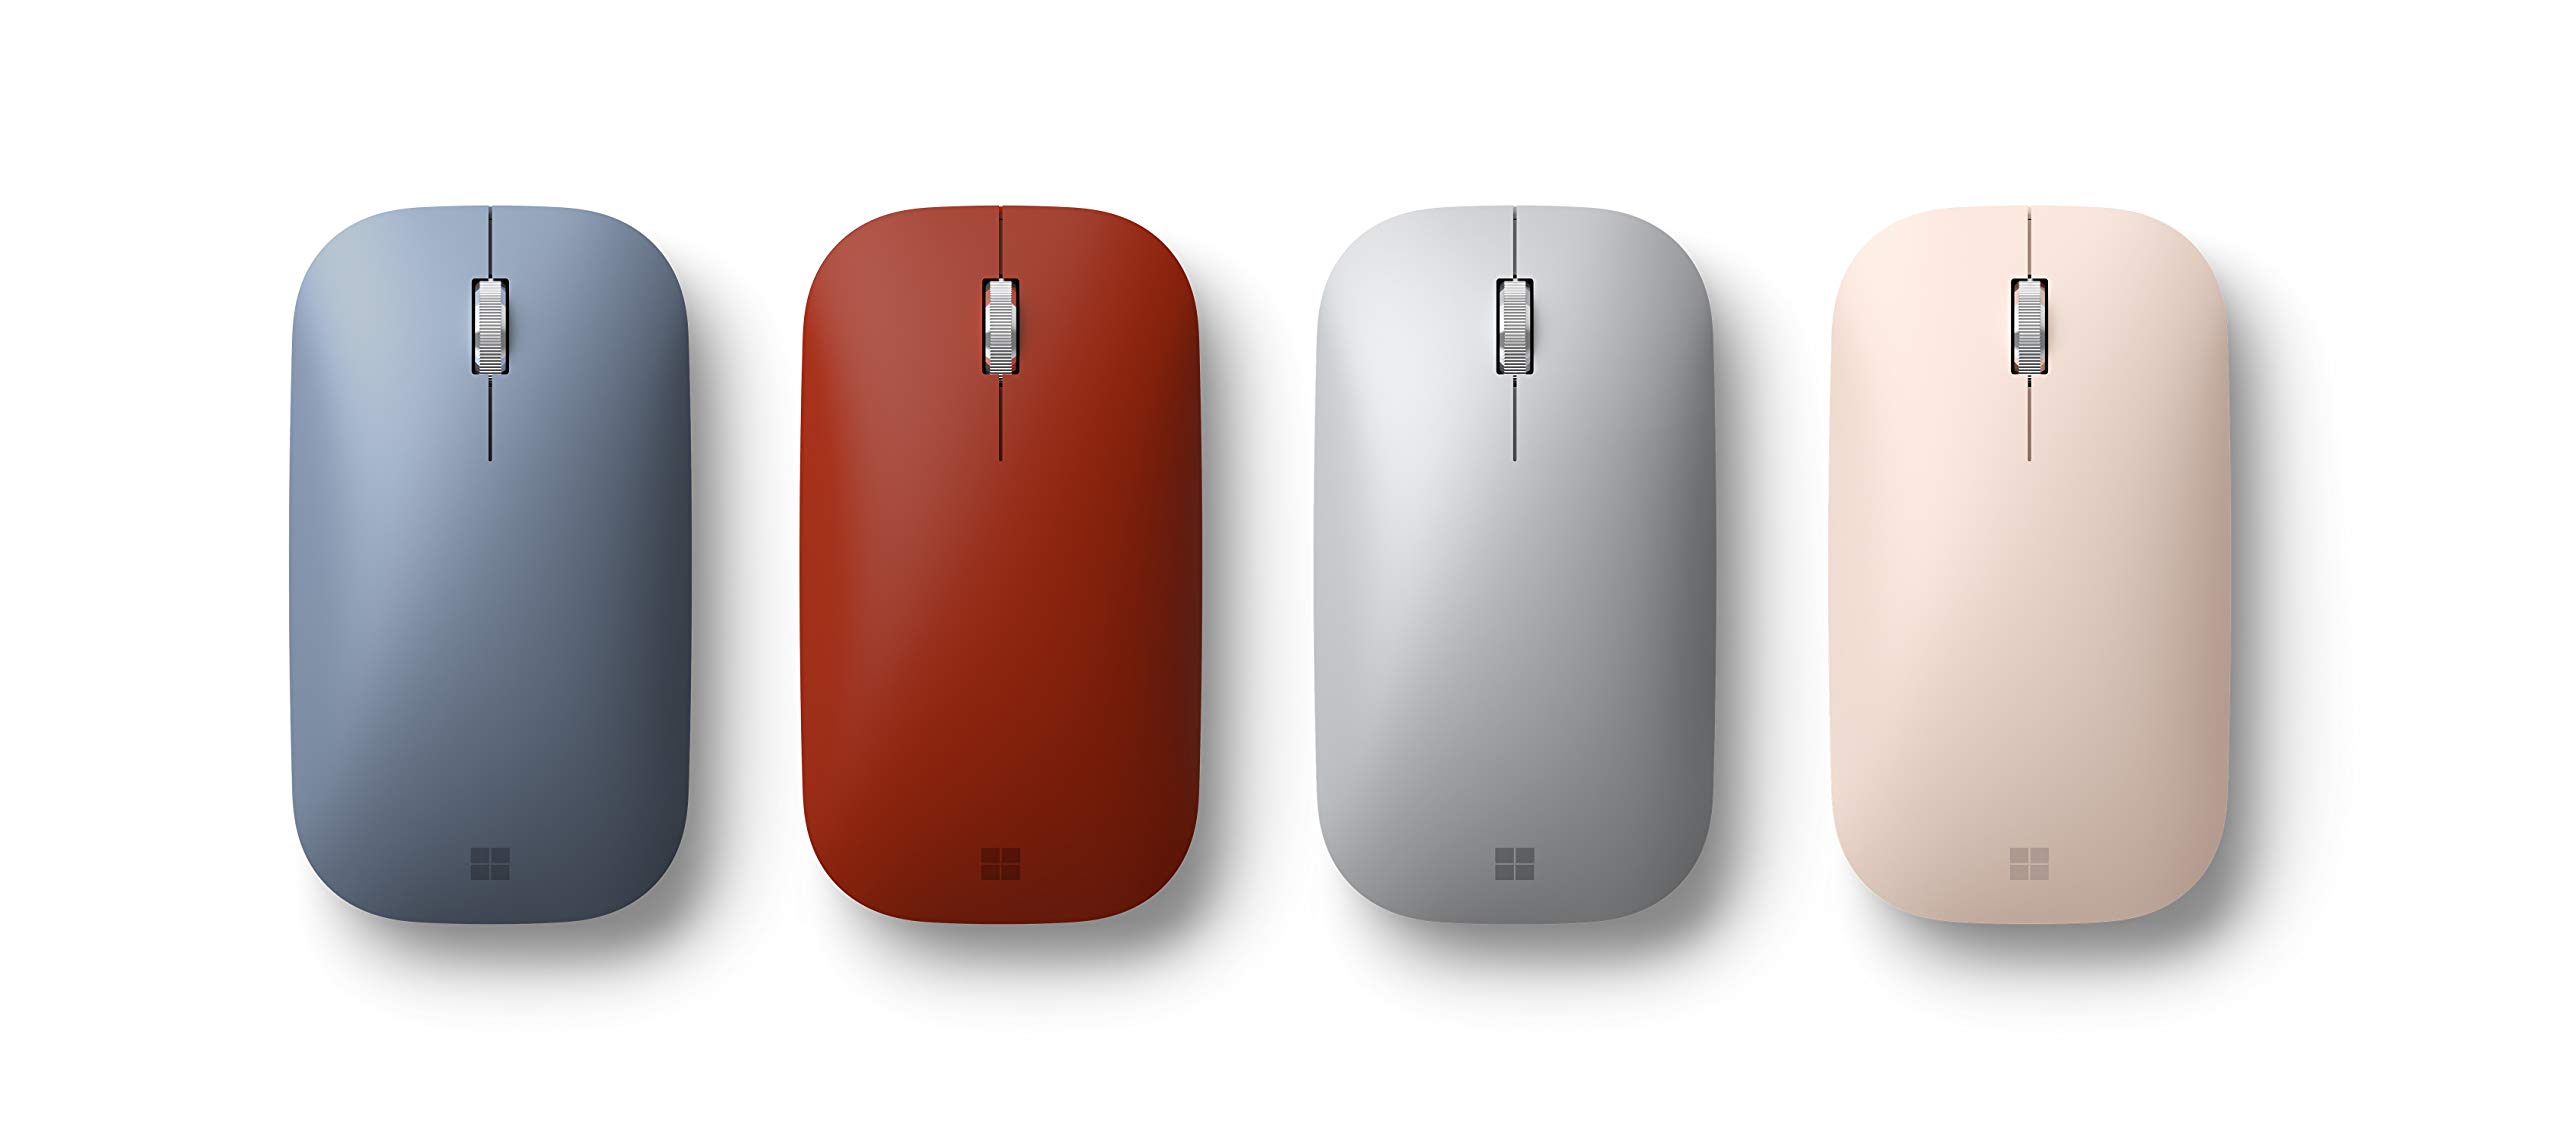 Microsoft Bluetooth Surface Mobile Mouse - Sandstone (KGY-00064)